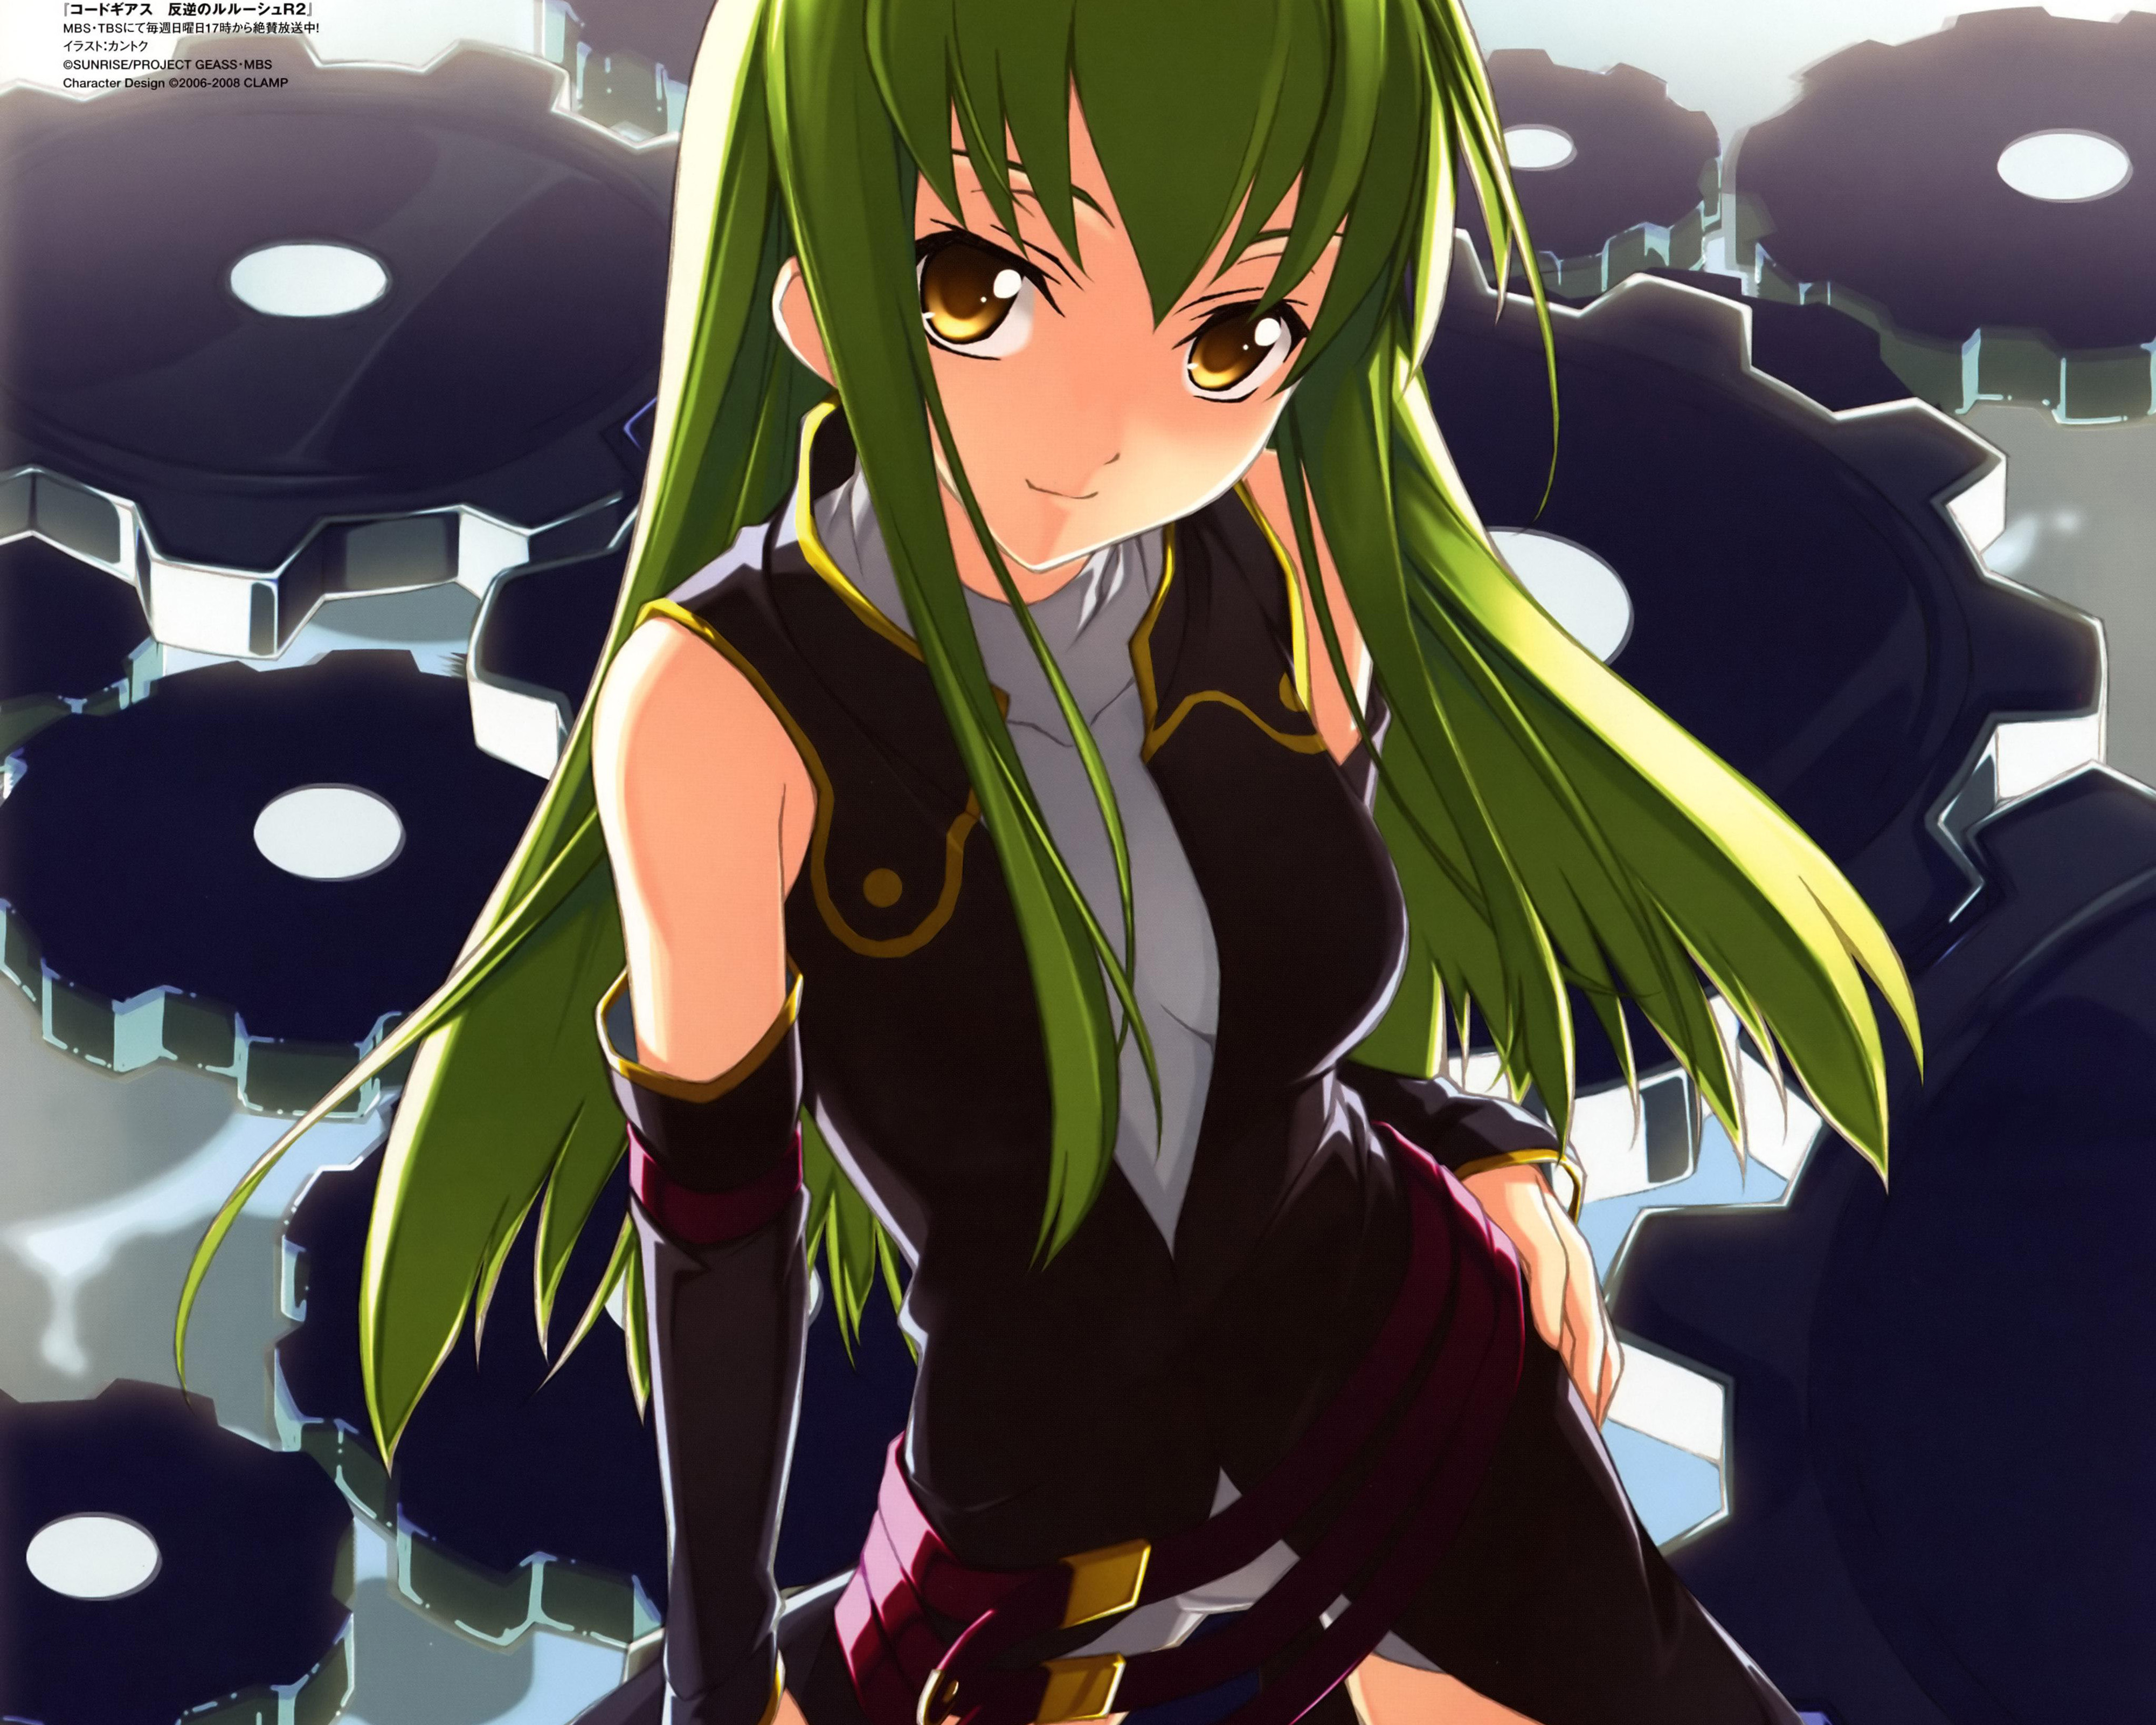 Page 3, HD cc code geass anime wallpapers